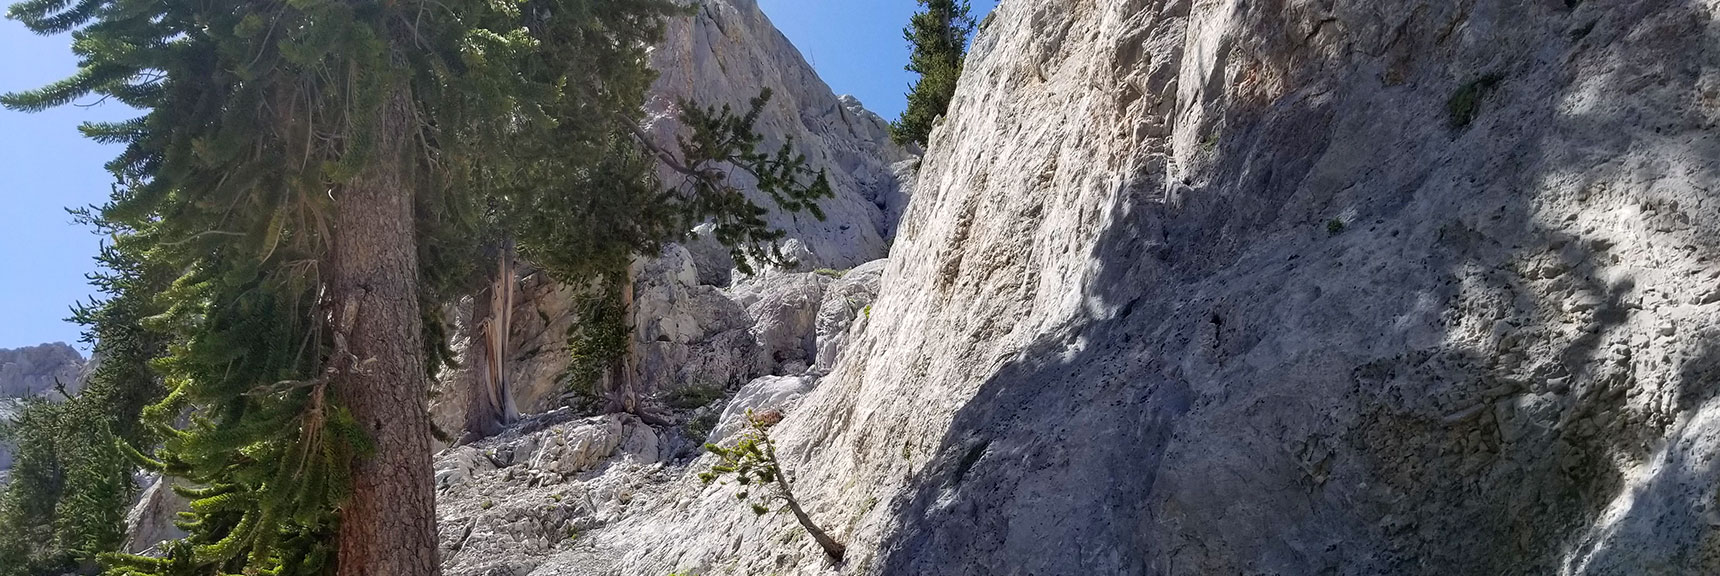 Entering the Mouth of the Narrow Mummy Mt. East Final Approach Canyon in Mt. Charleston Wilderness, Nevada